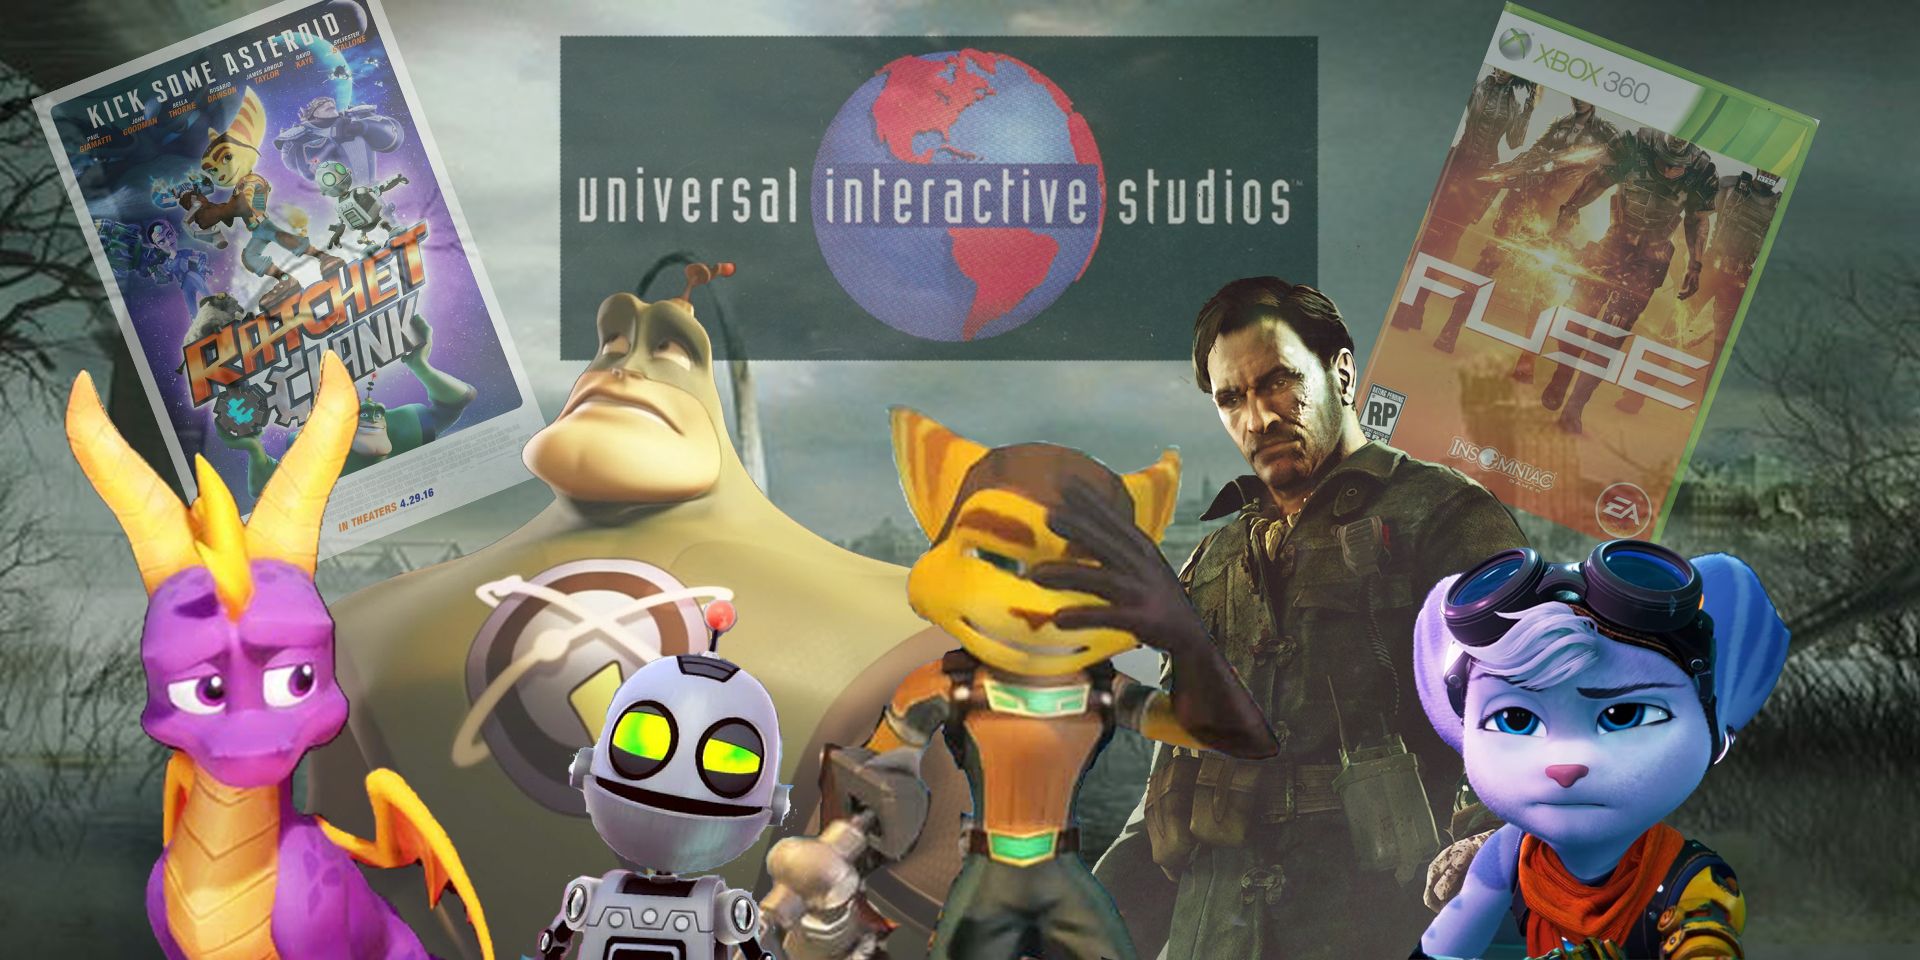 The cast of Insomniac characters grimacing at the studio's blunders.